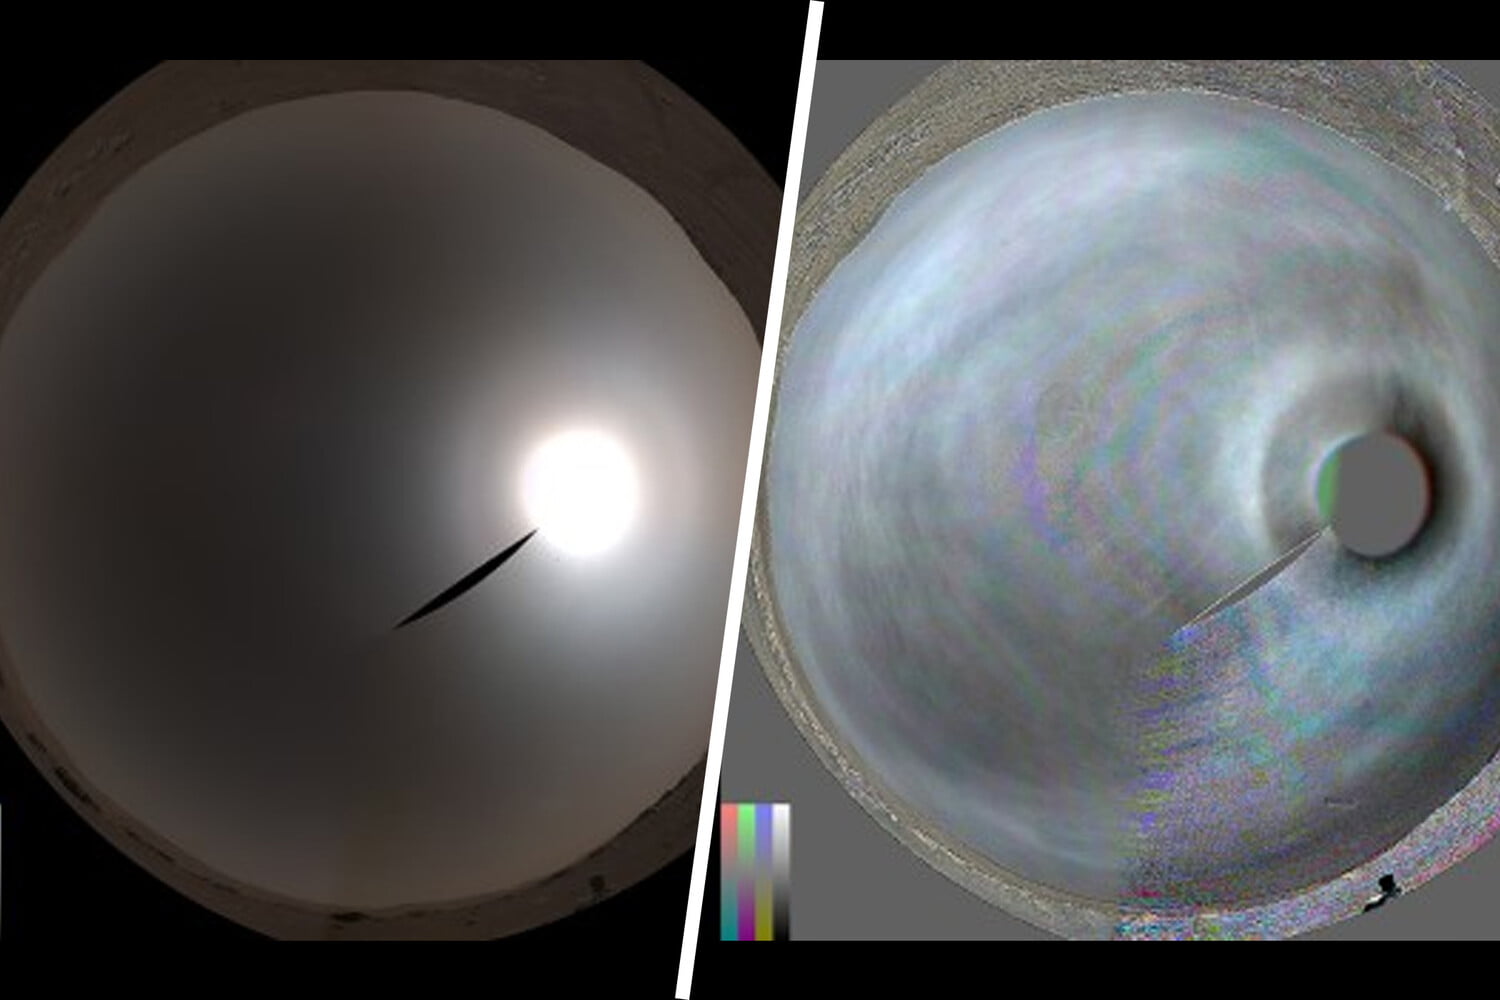 Perseverance rover photographed the first solar halo on Mars